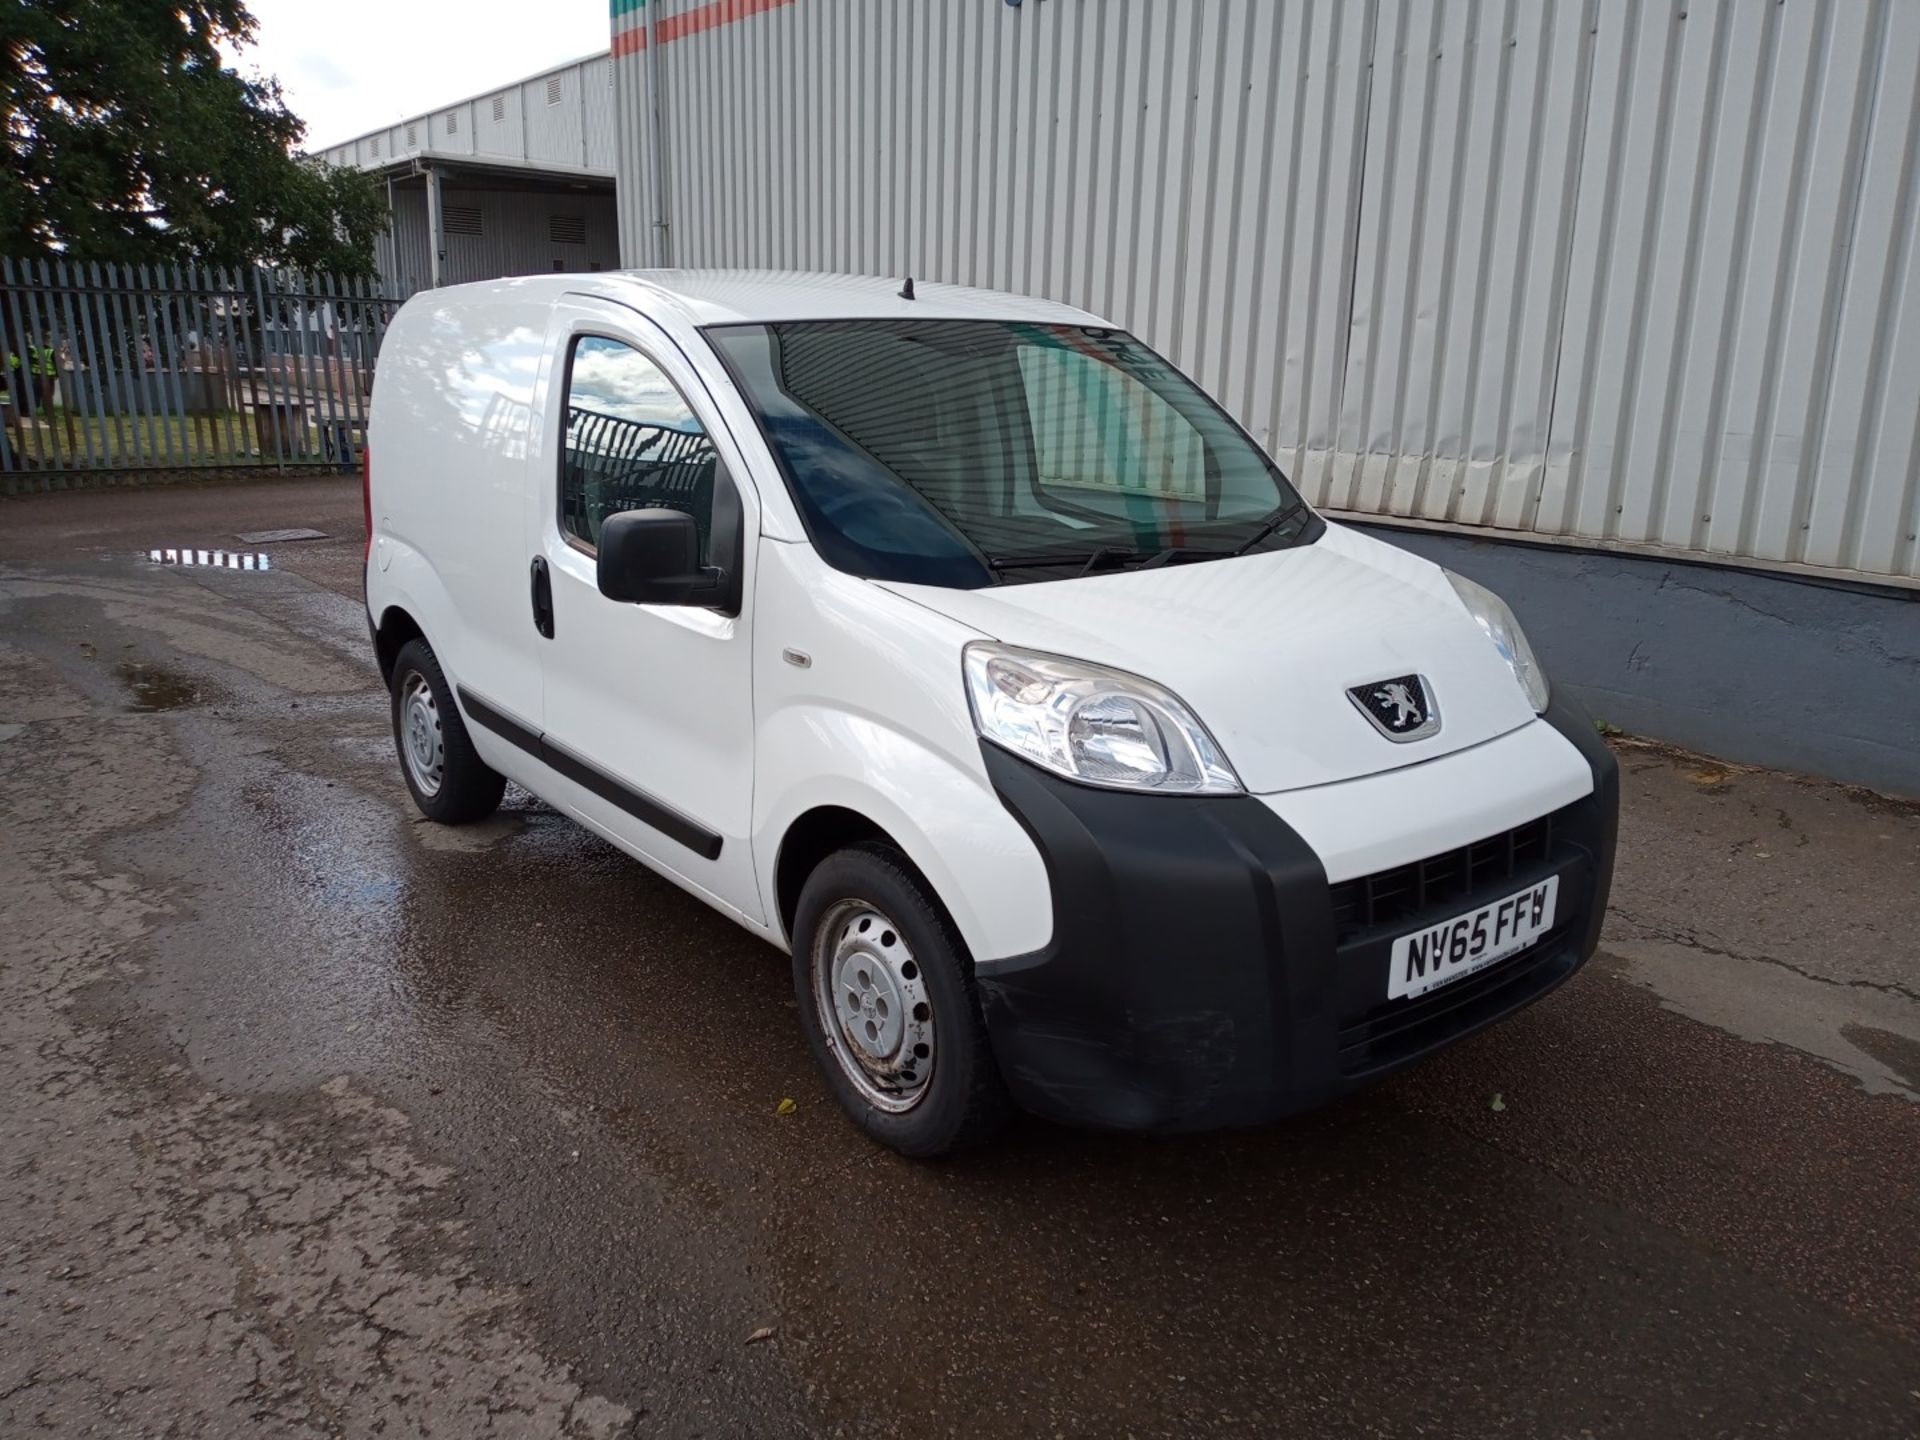 2015 Peugeot Bipper S Hdi White Panel - CL505 - Ref: VVS031 - Location: Corby, Northamptonshire - Image 2 of 25